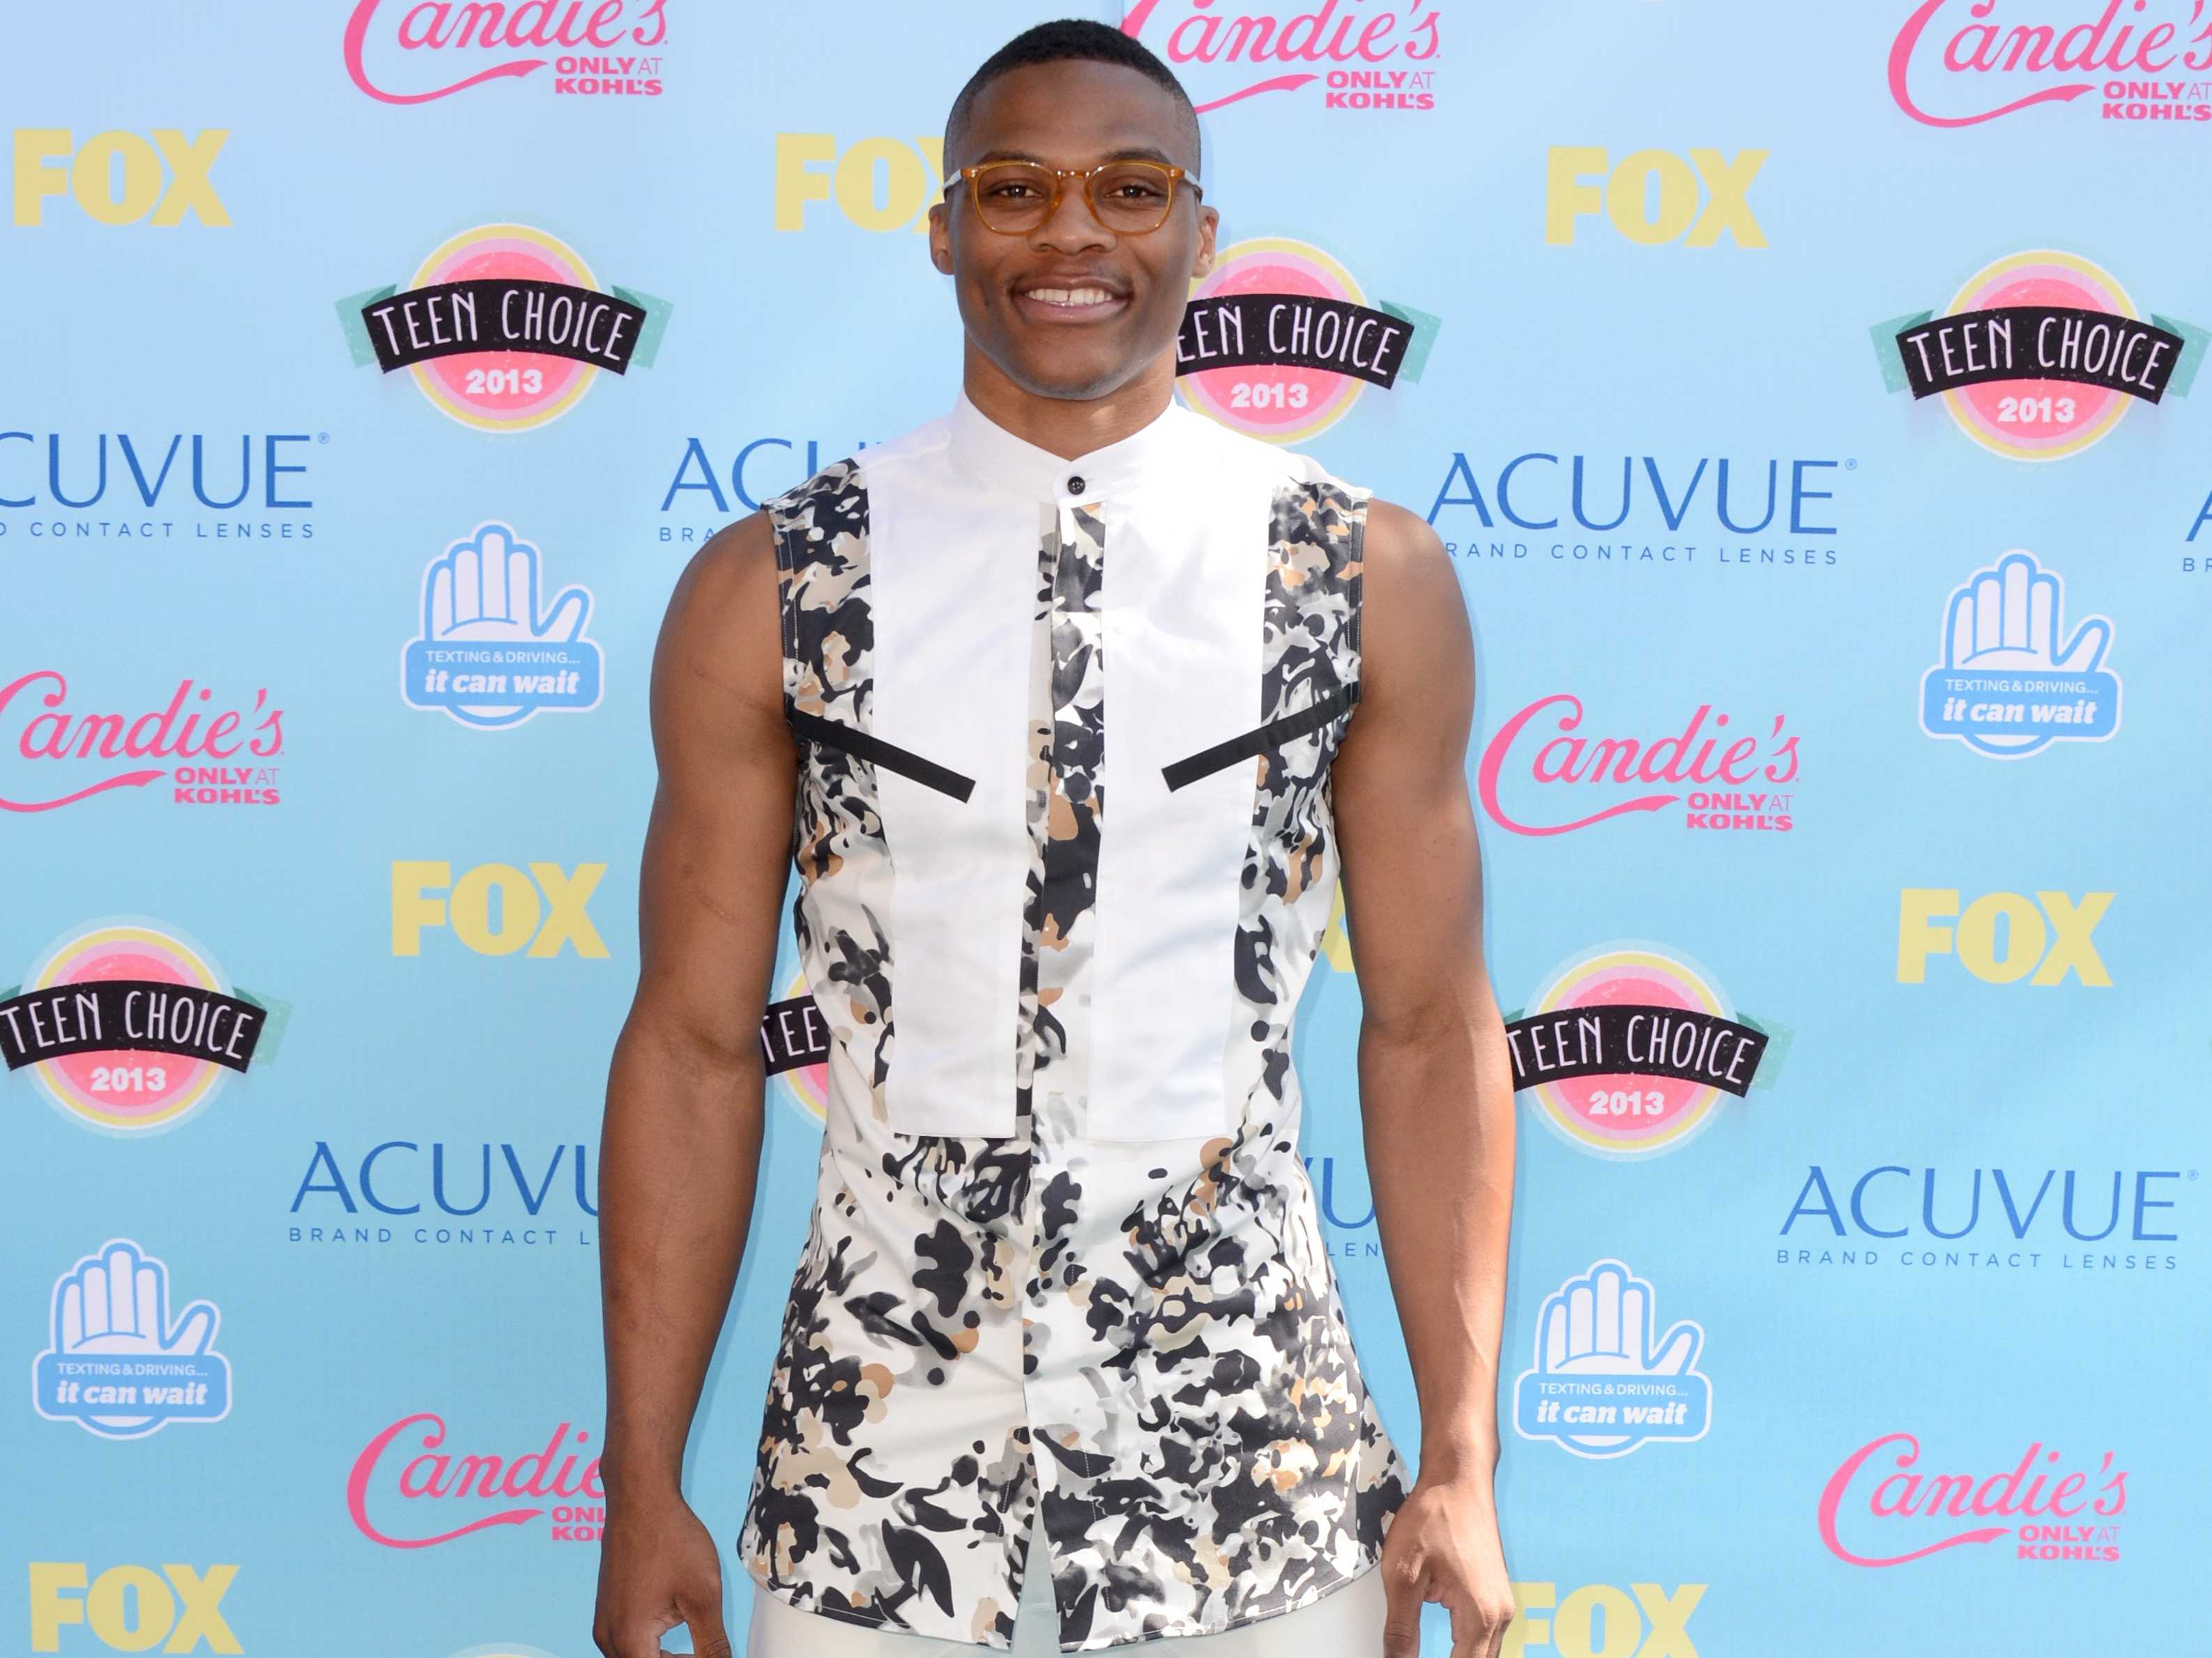 russell-westbrooks-teen-choice-awards-outfit-is-a-bad-sign-for-the-future-of-nba-fashion